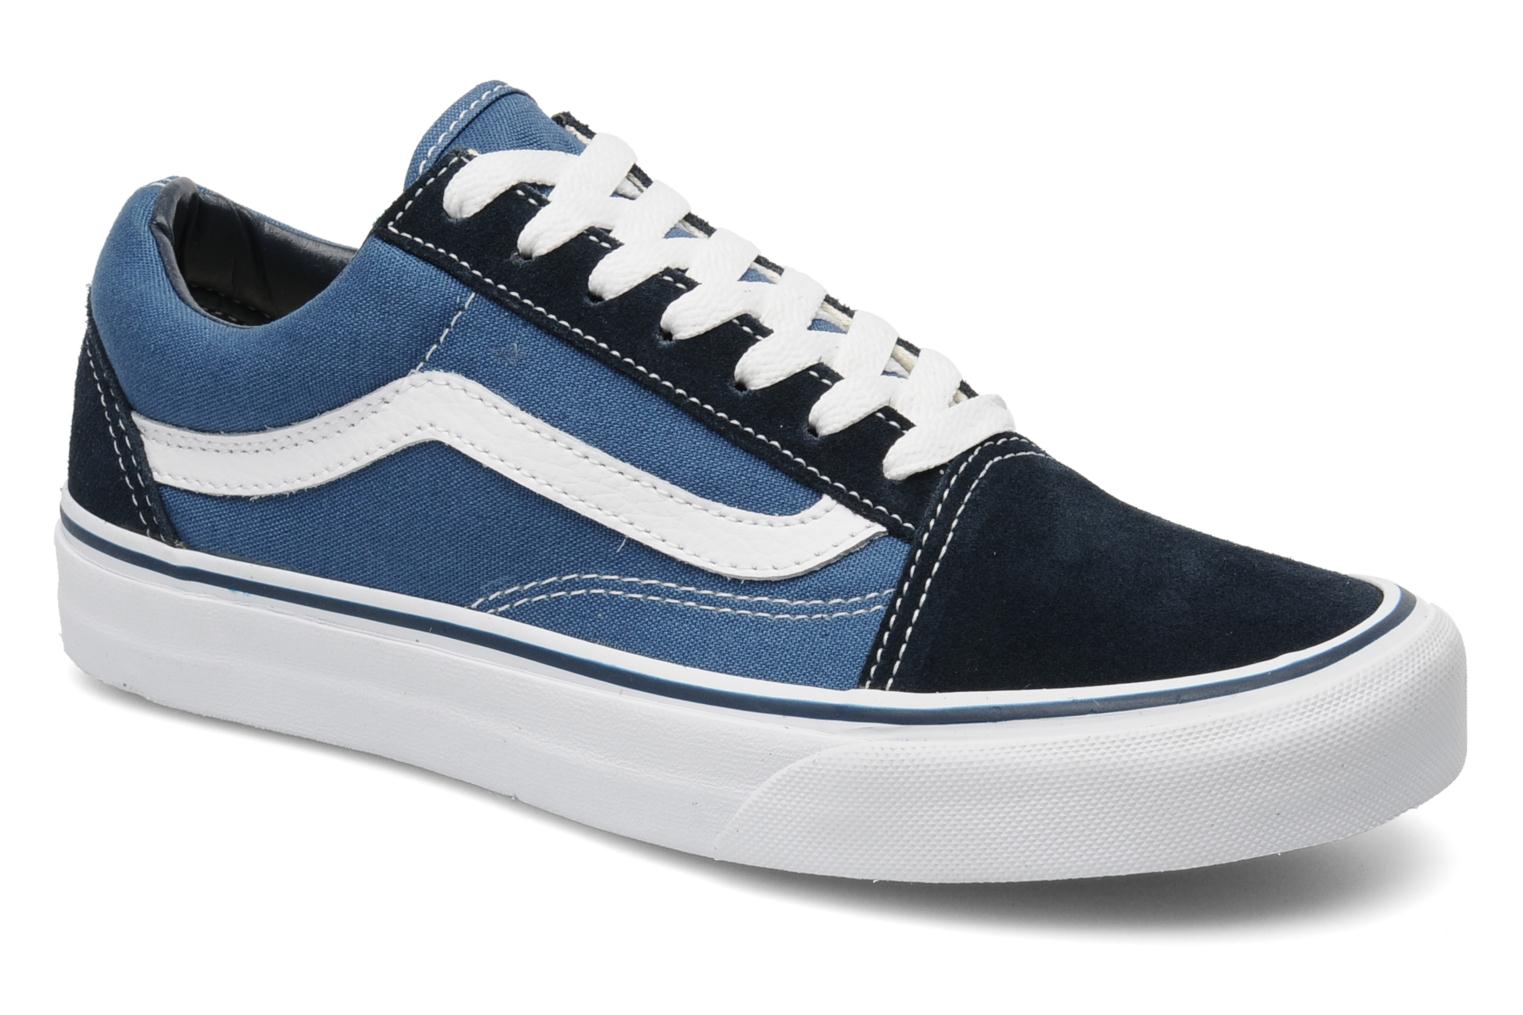 Vans Old Skool W Trainers in Blue at Sarenza.co.uk (164795)